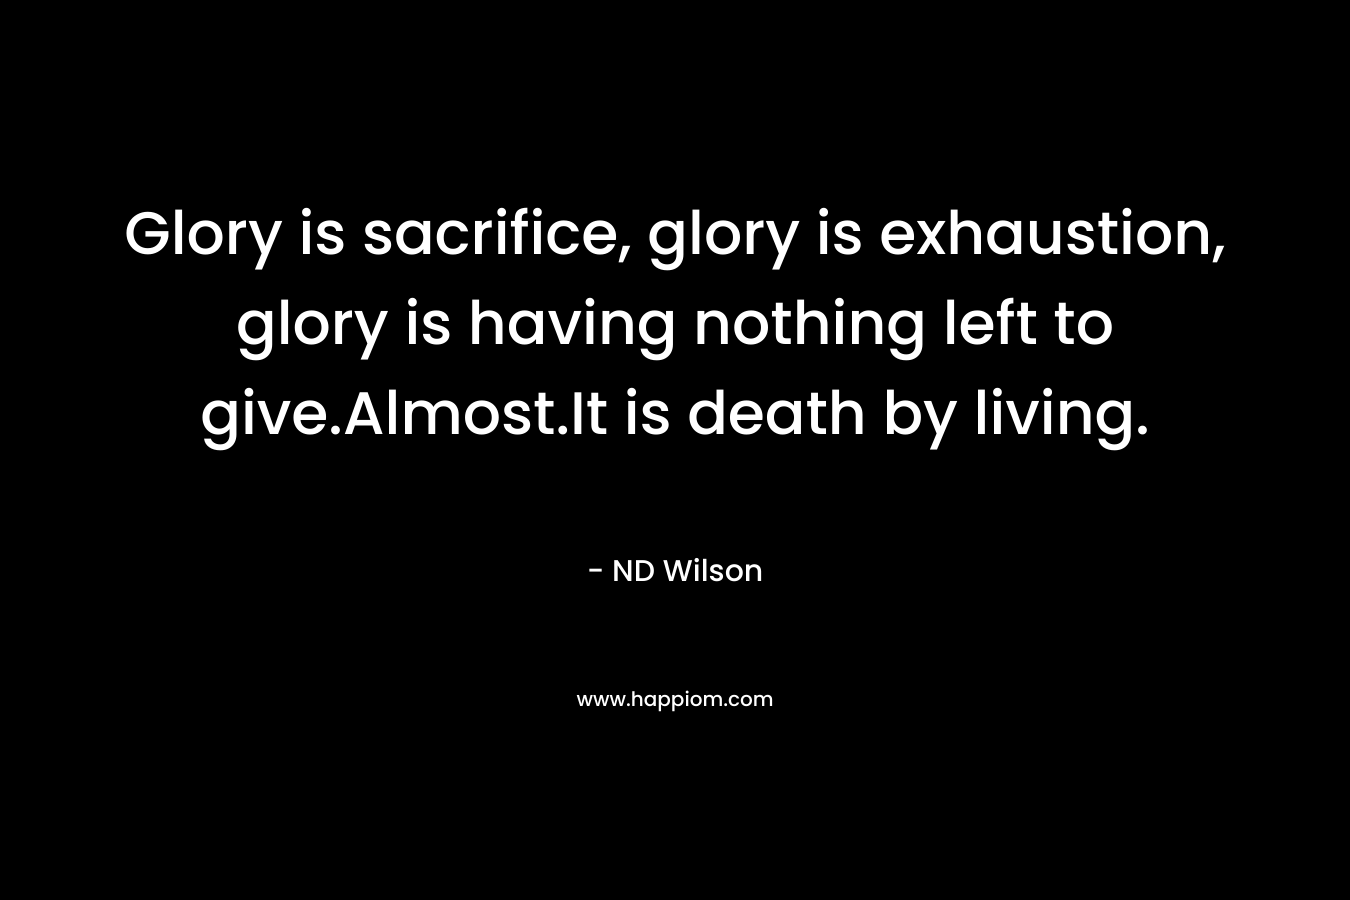 Glory is sacrifice, glory is exhaustion, glory is having nothing left to give.Almost.It is death by living.